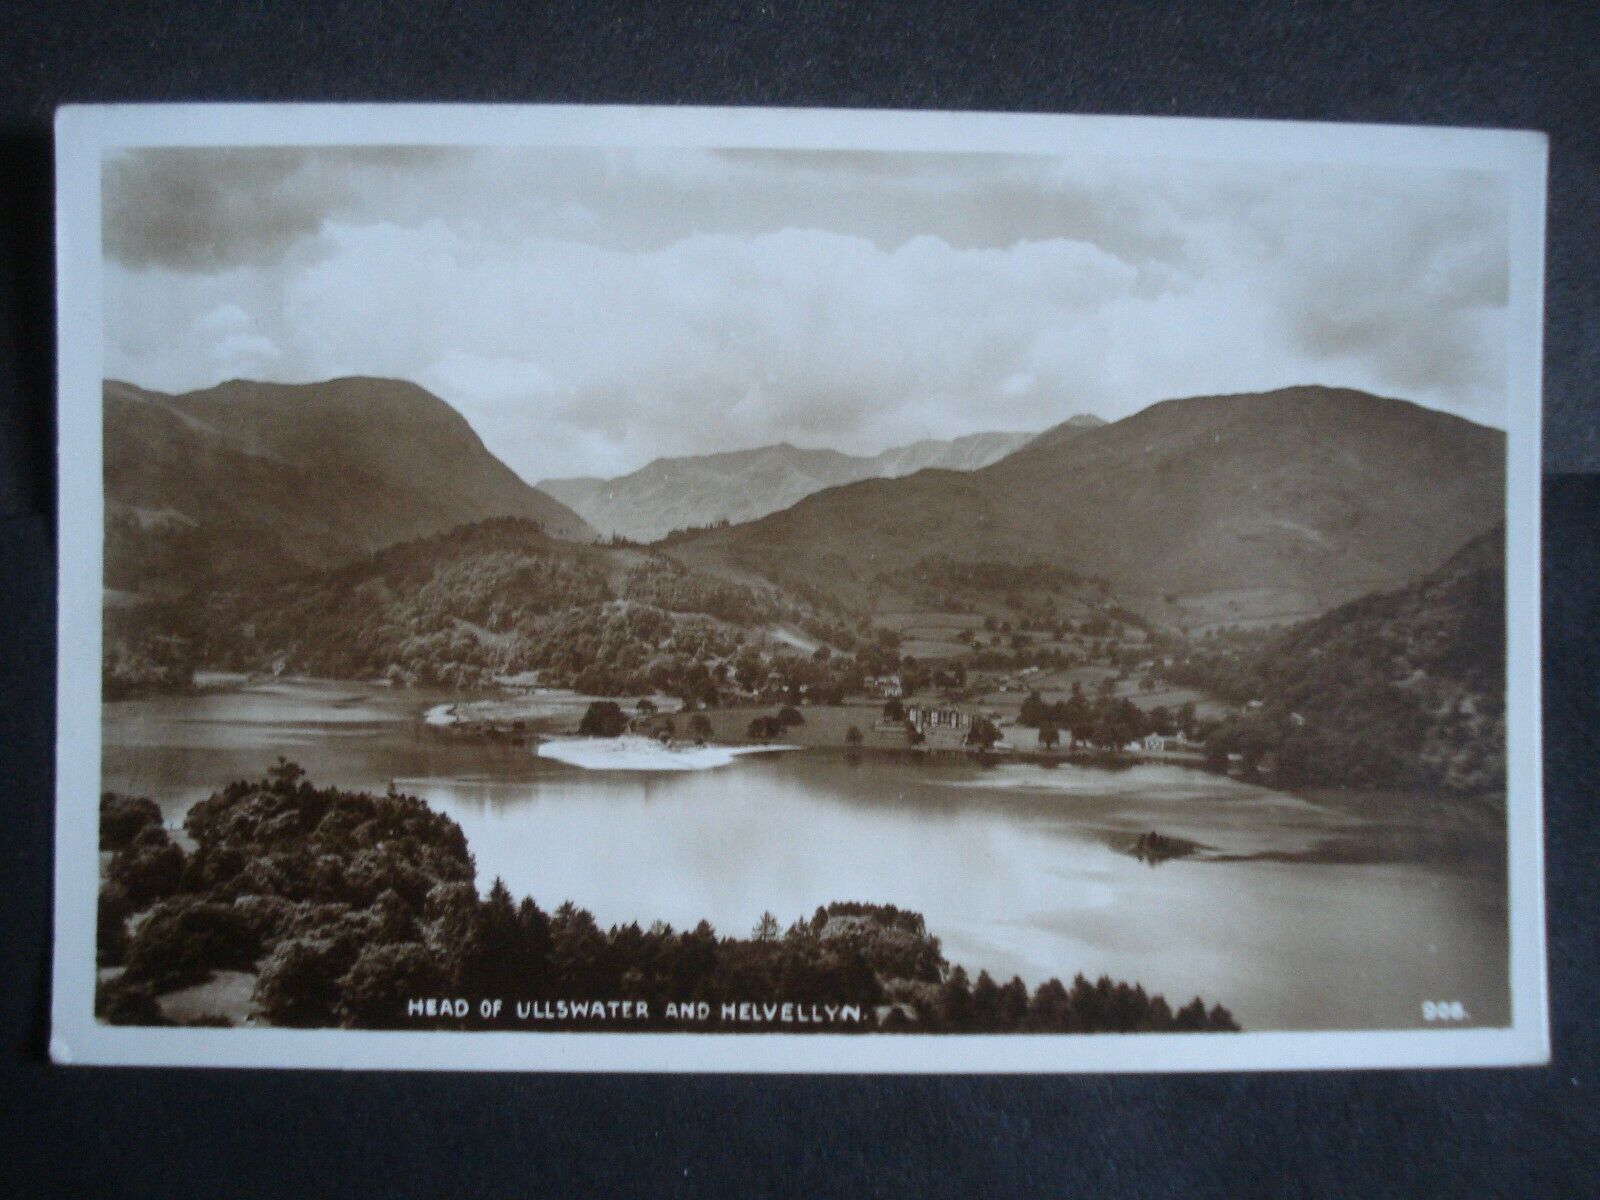 House Clearance - Unused Black & White Post Card Head of Ullswater and Helvellyn